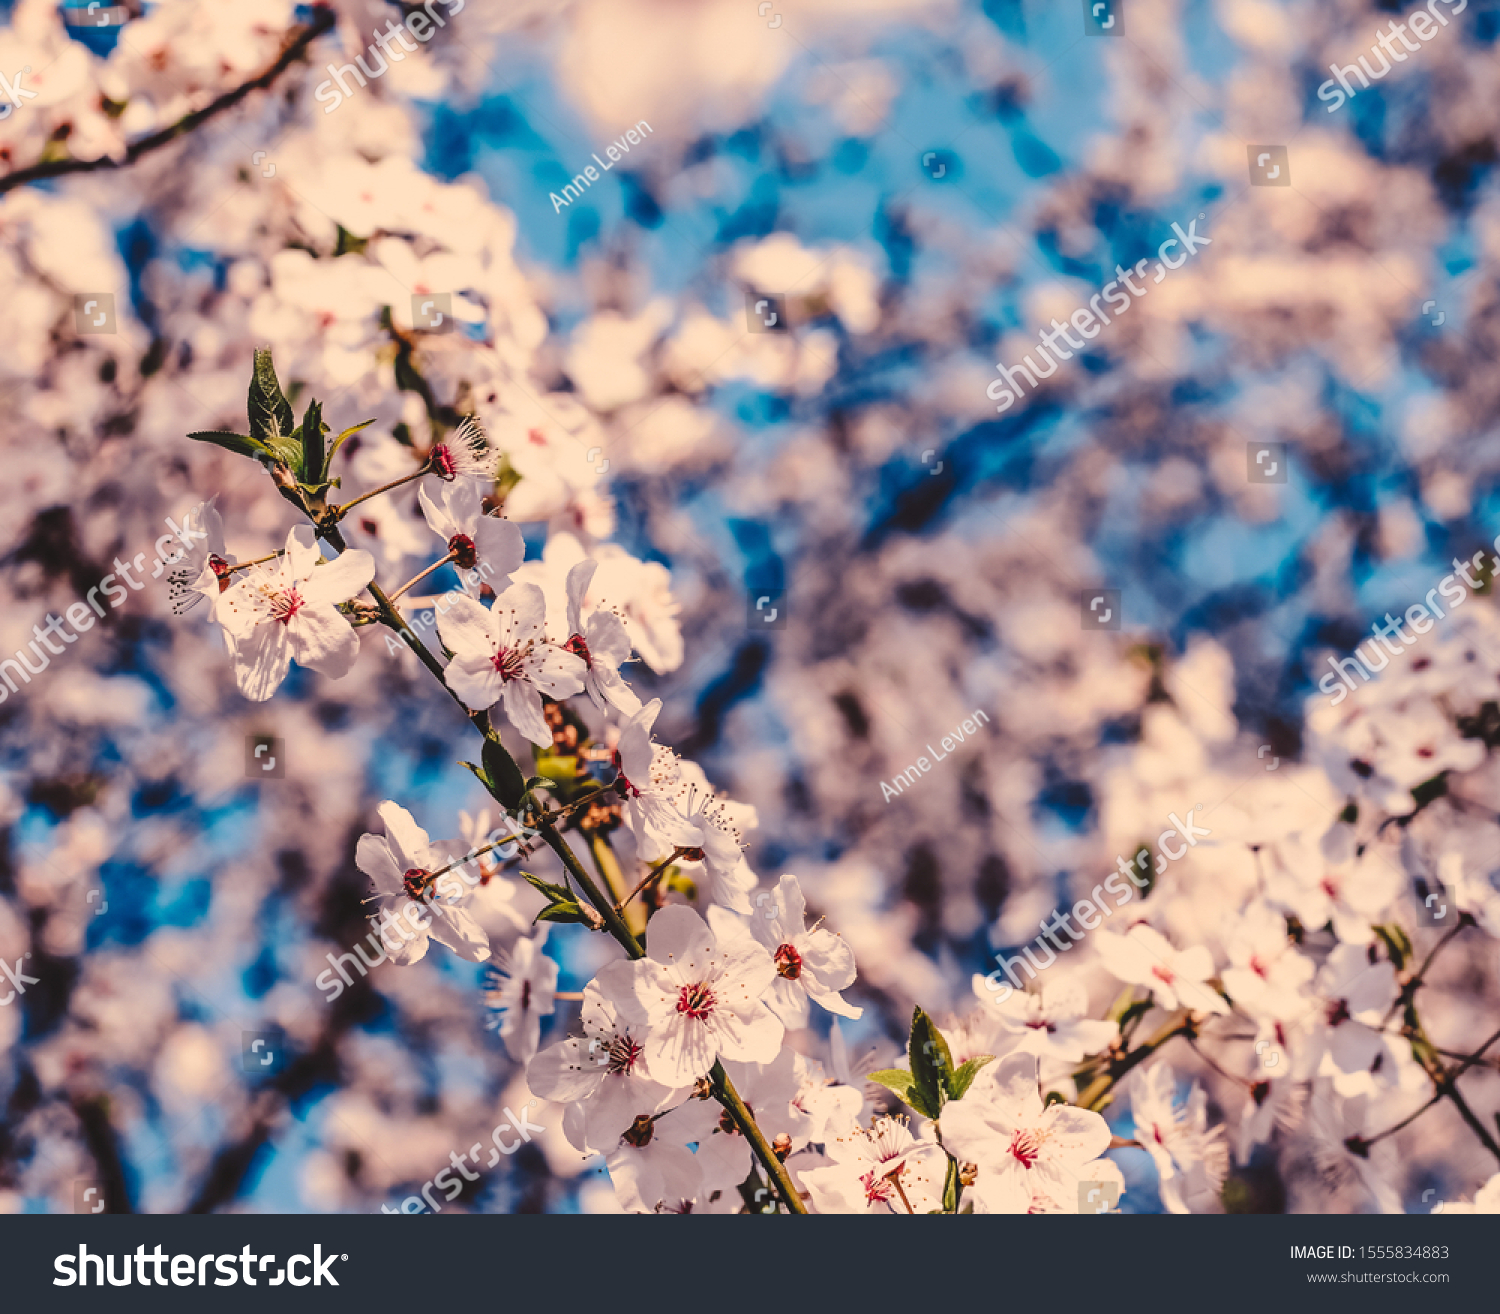 Flower art, romantic card and botanical backdrop concept - Vintage cherry flowers in bloom at sunrise as nature background for spring holiday design, floral dream garden #1555834883